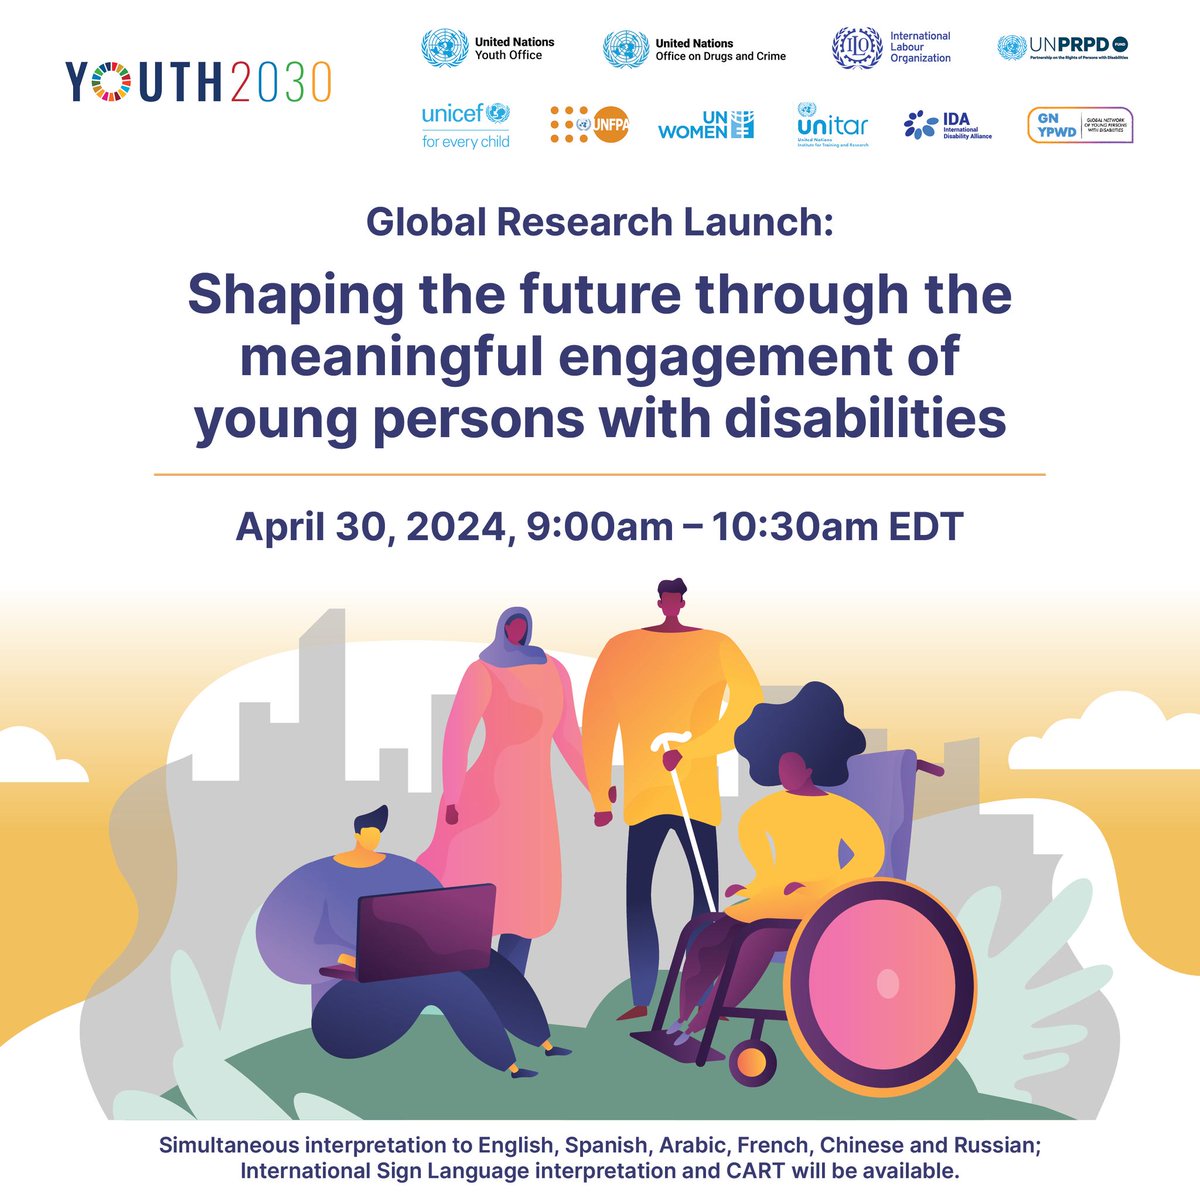 📢 Join us for the Launch of the Report: Shaping the future through the meaningful engagement of young persons with disabilities
🕑30 April 2024, 9:00am - 10:30am EDT
📍Zoom
‼️Register by April 29: t.ly/-vBAj
#youth2030 #disabilityinclusion #CRPD